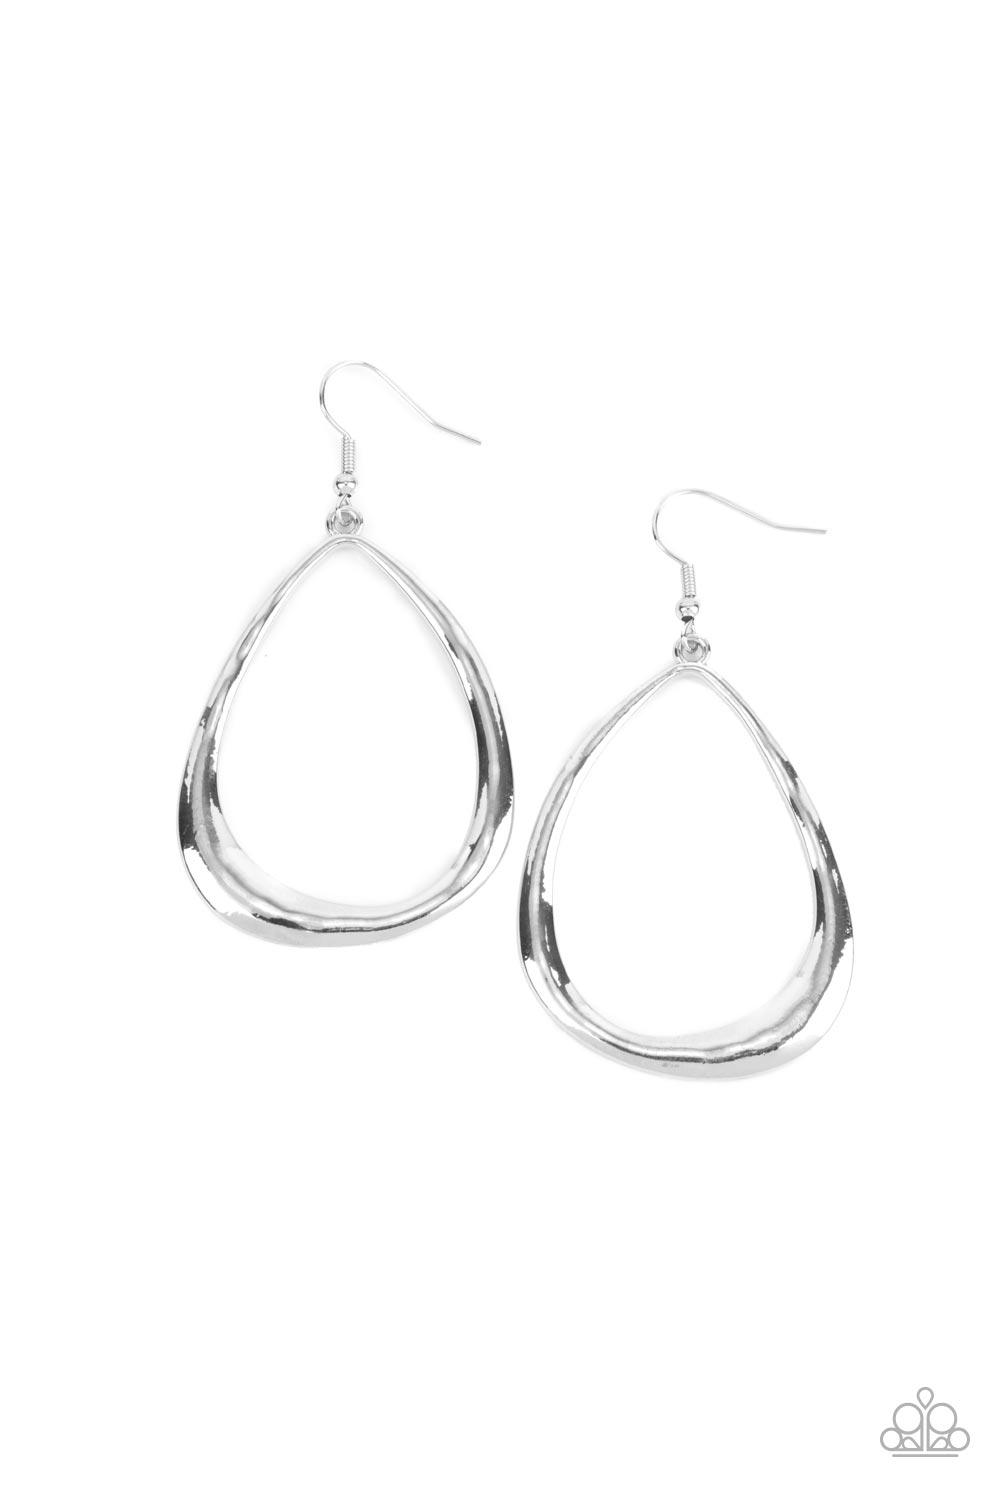 ARTISAN Gallery Paparazzi Accessories Earrings Silver